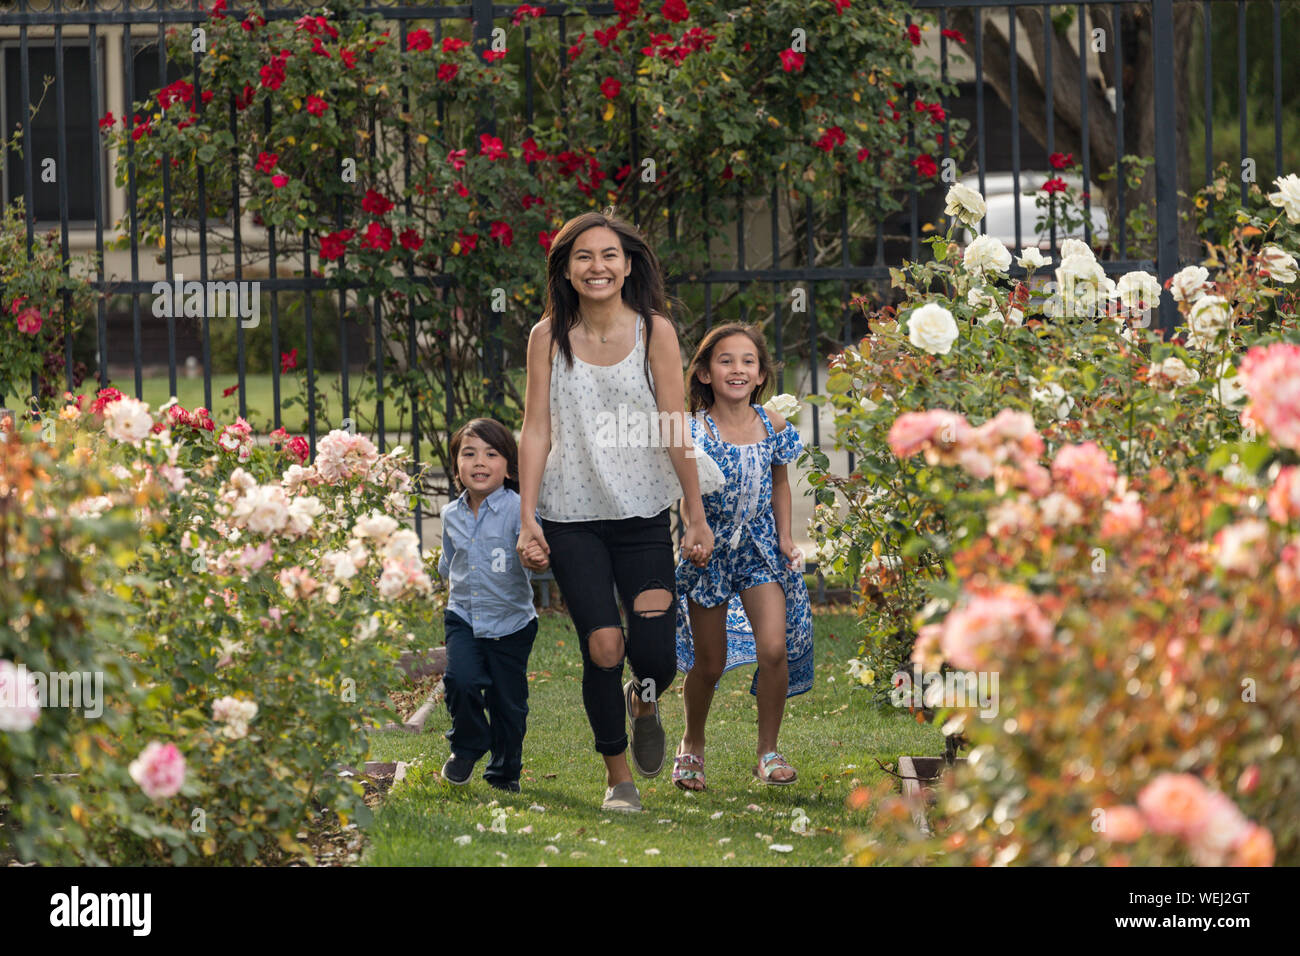 Sisters and brother of Asian and mixed ethnicity running and laughing together in rose garden, San Jose, California Stock Photo